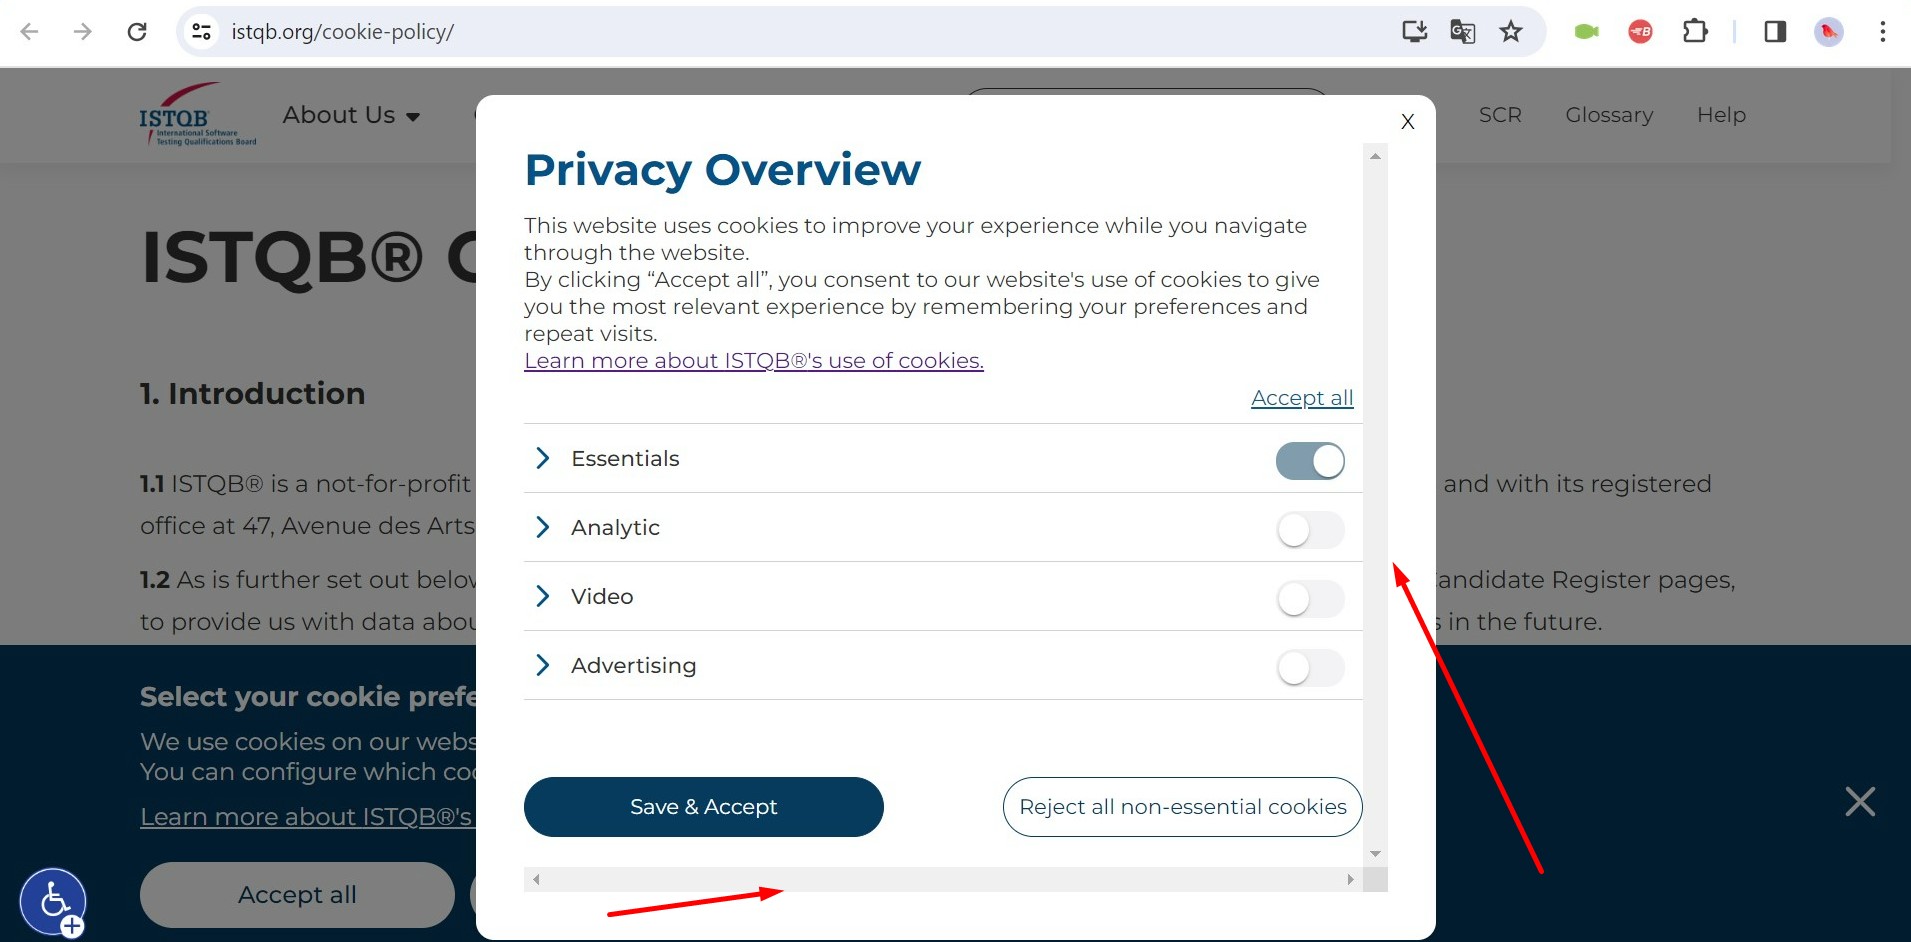 Extra scrolls in “Privacy Overview” window for cookies